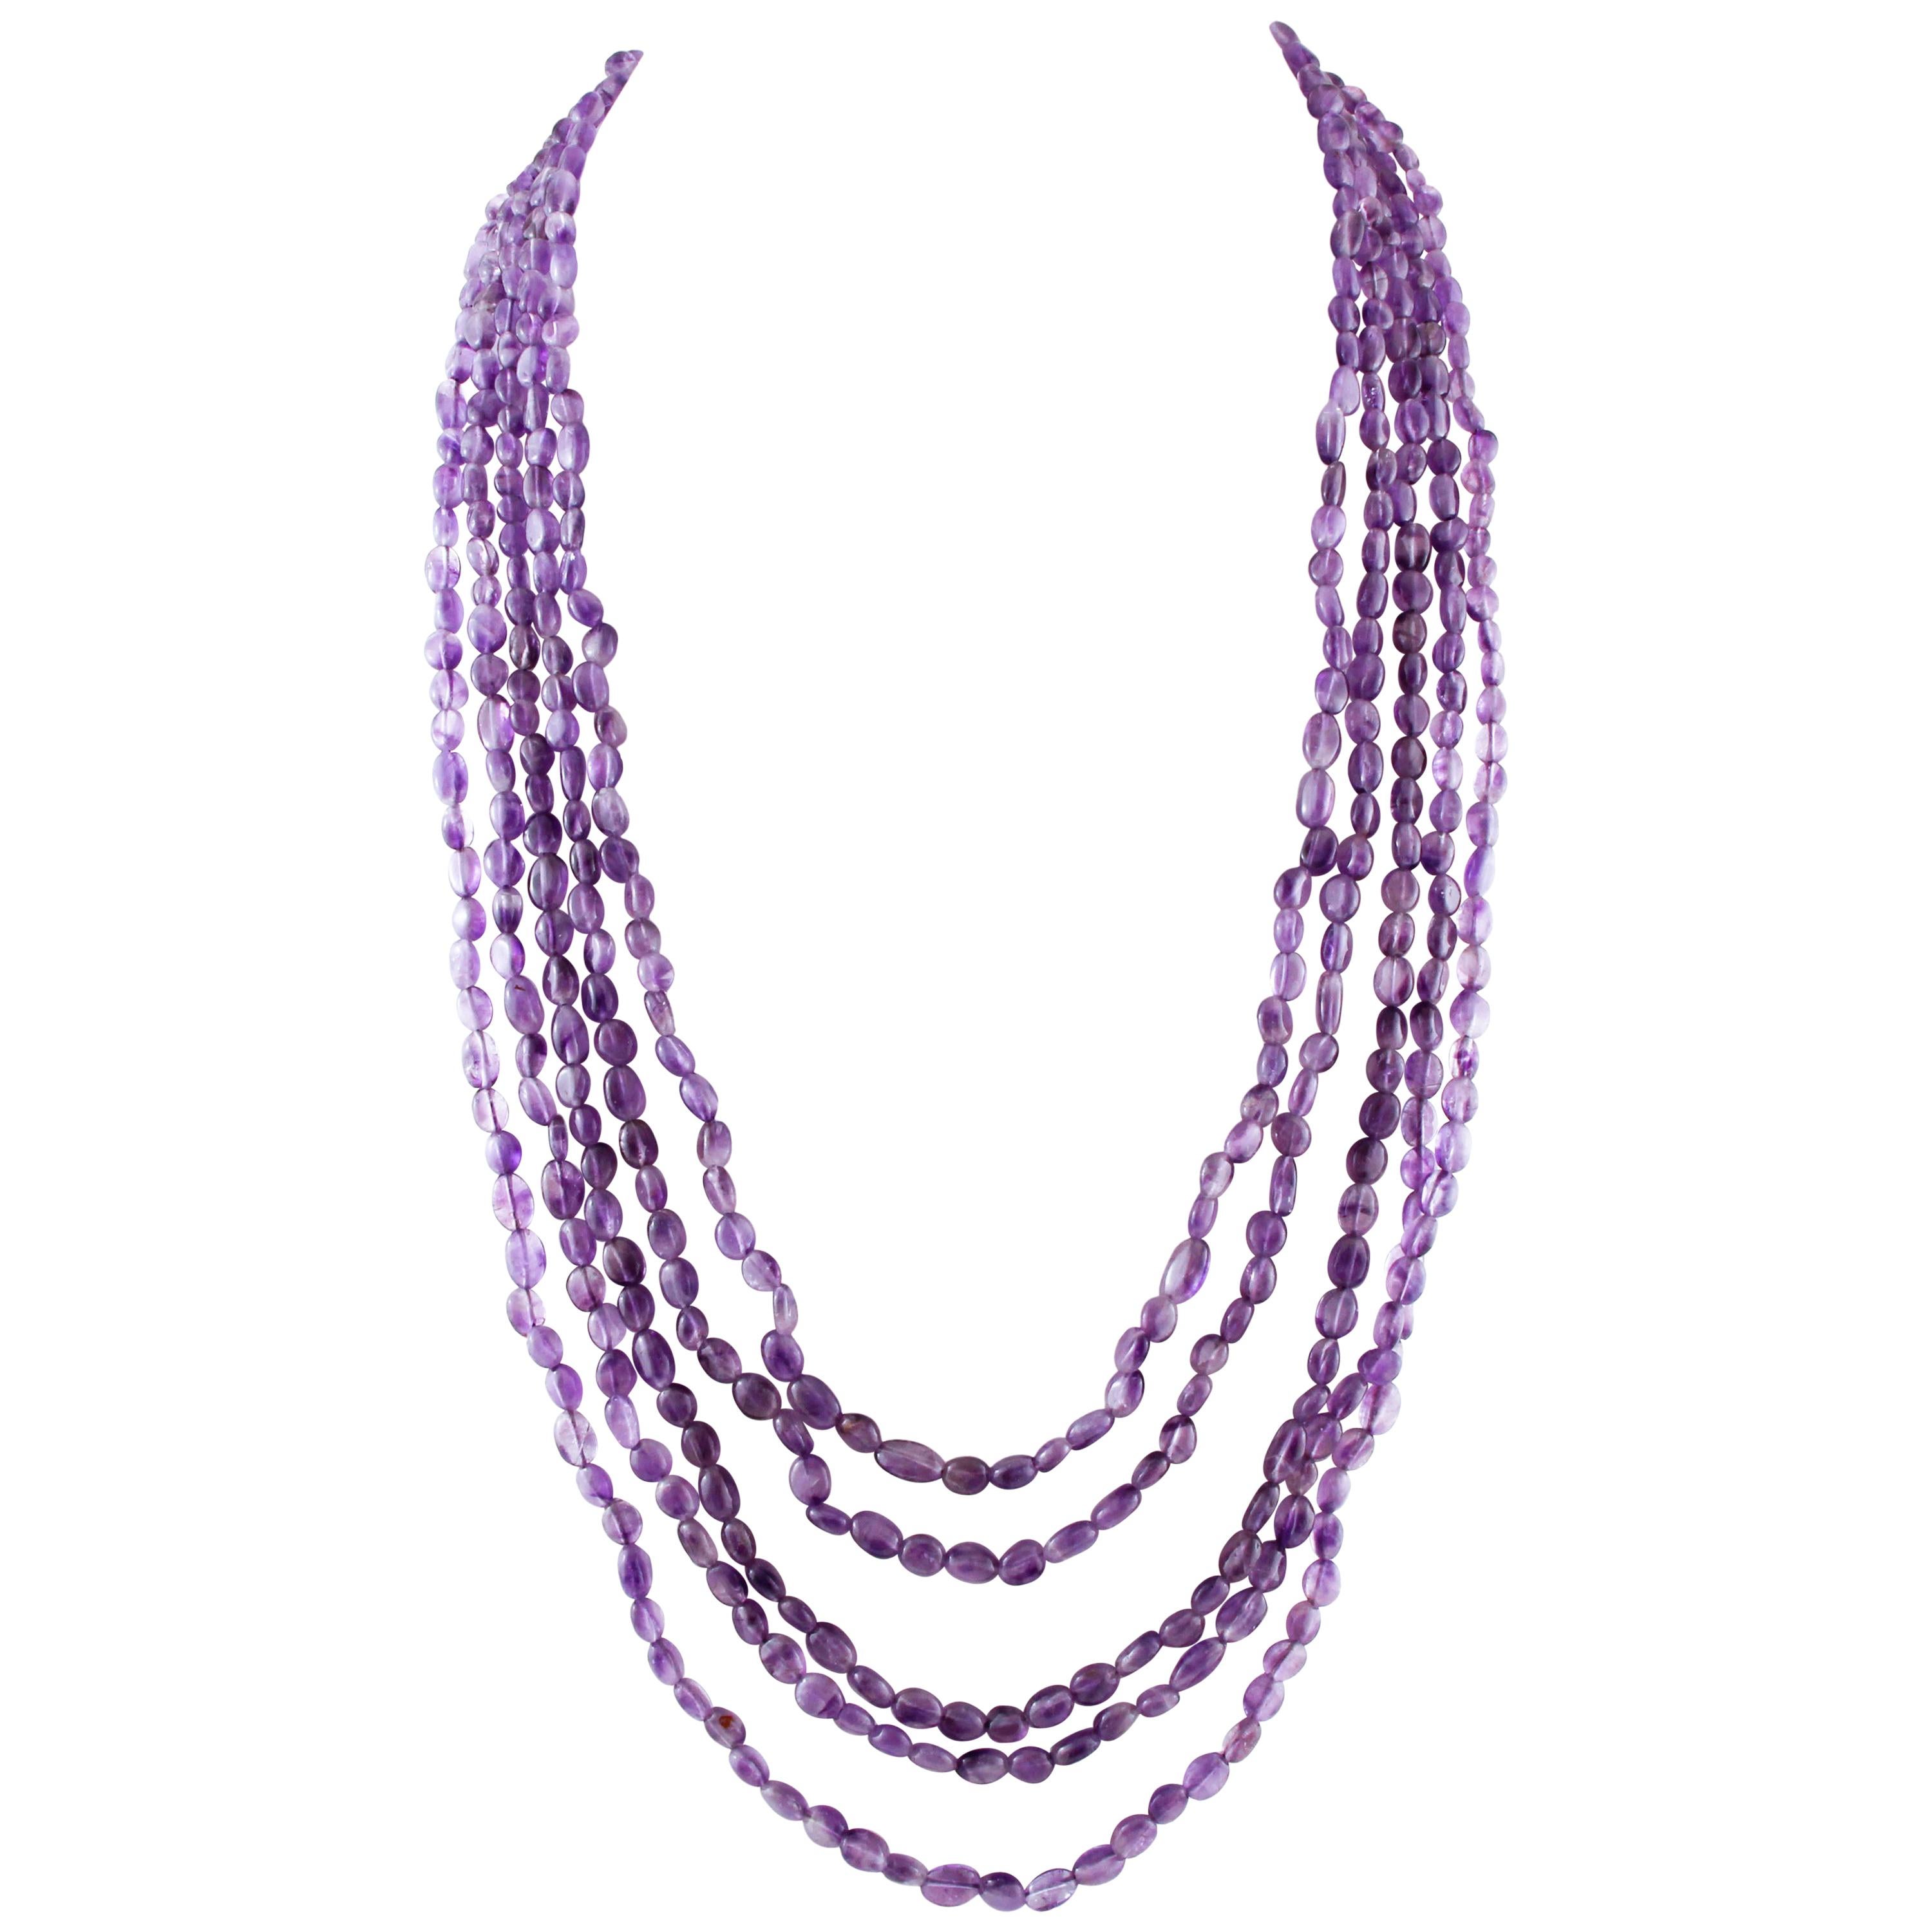 Amethyst Multi-Strands Necklace with 18 Karat Yellow Gold Closure